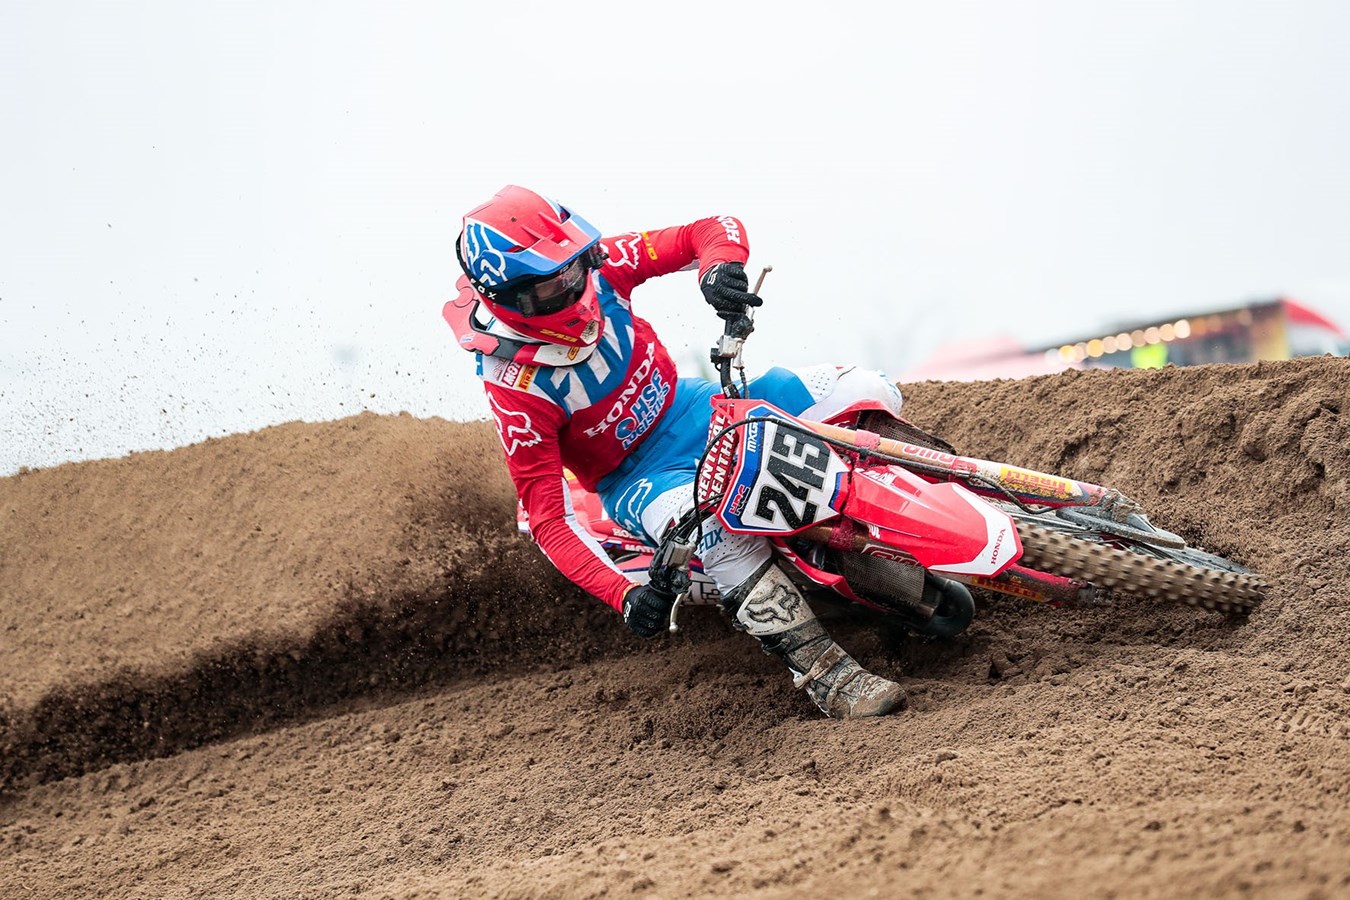 Gajser victory ends Italian Championship with a flourish